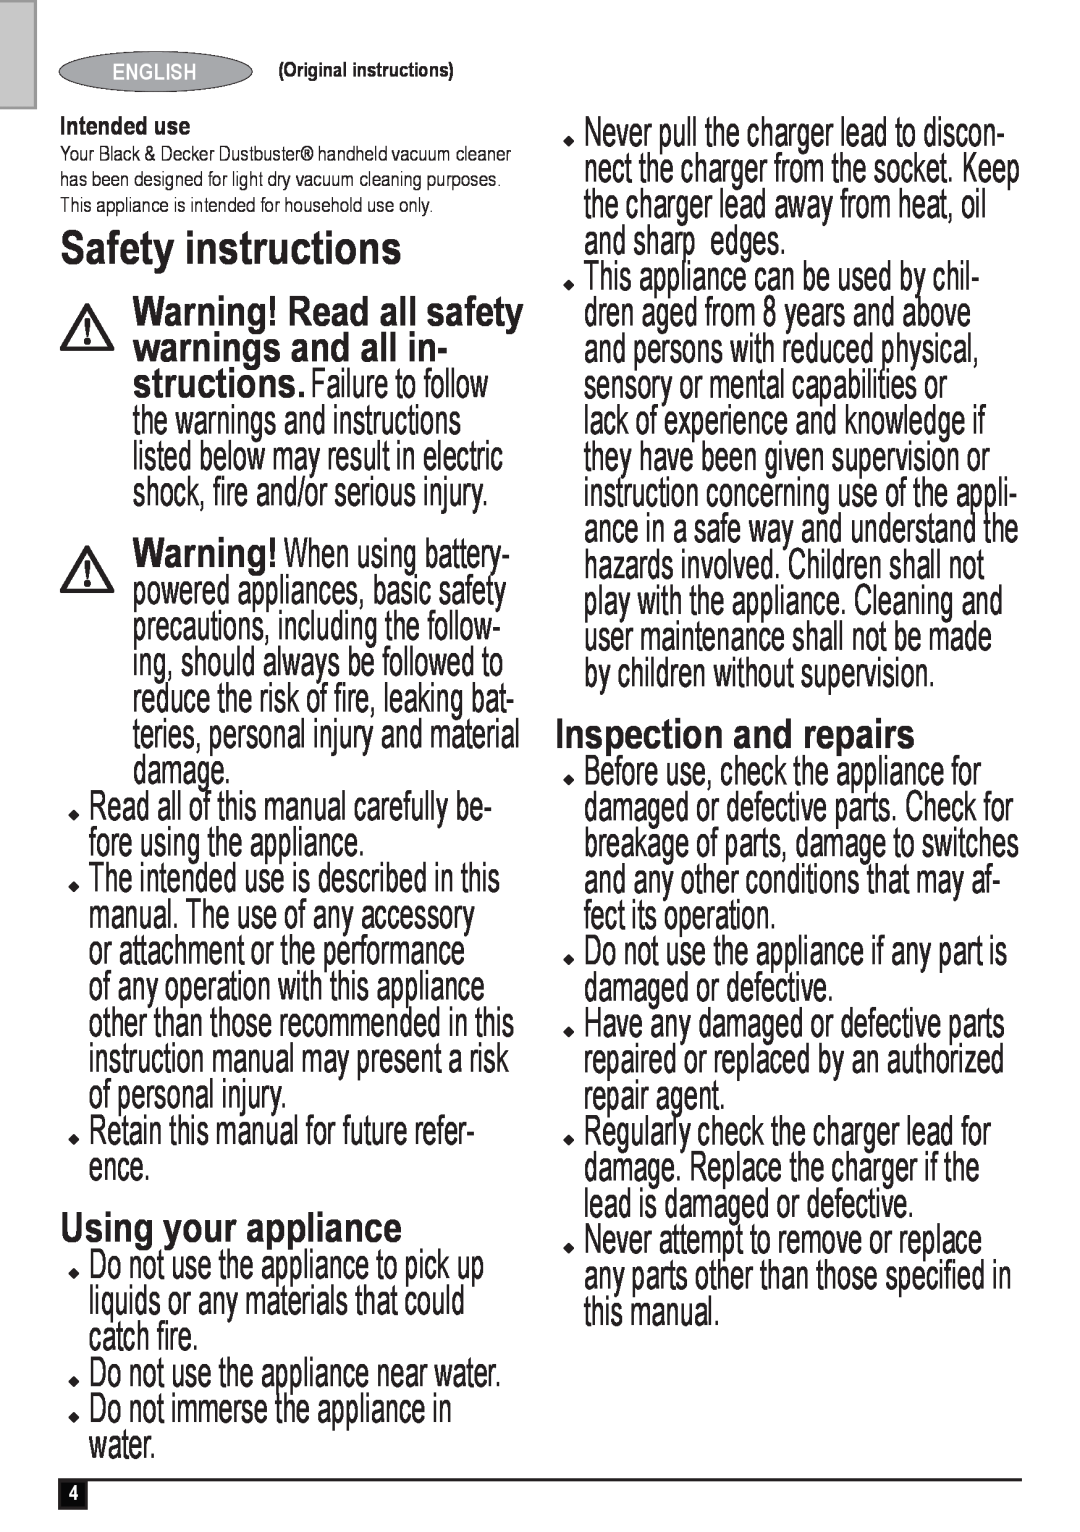 Black & Decker DV9610ECN Safety instructions, @ Warning! Read all safety, u Retain this manual for future refer- ence 